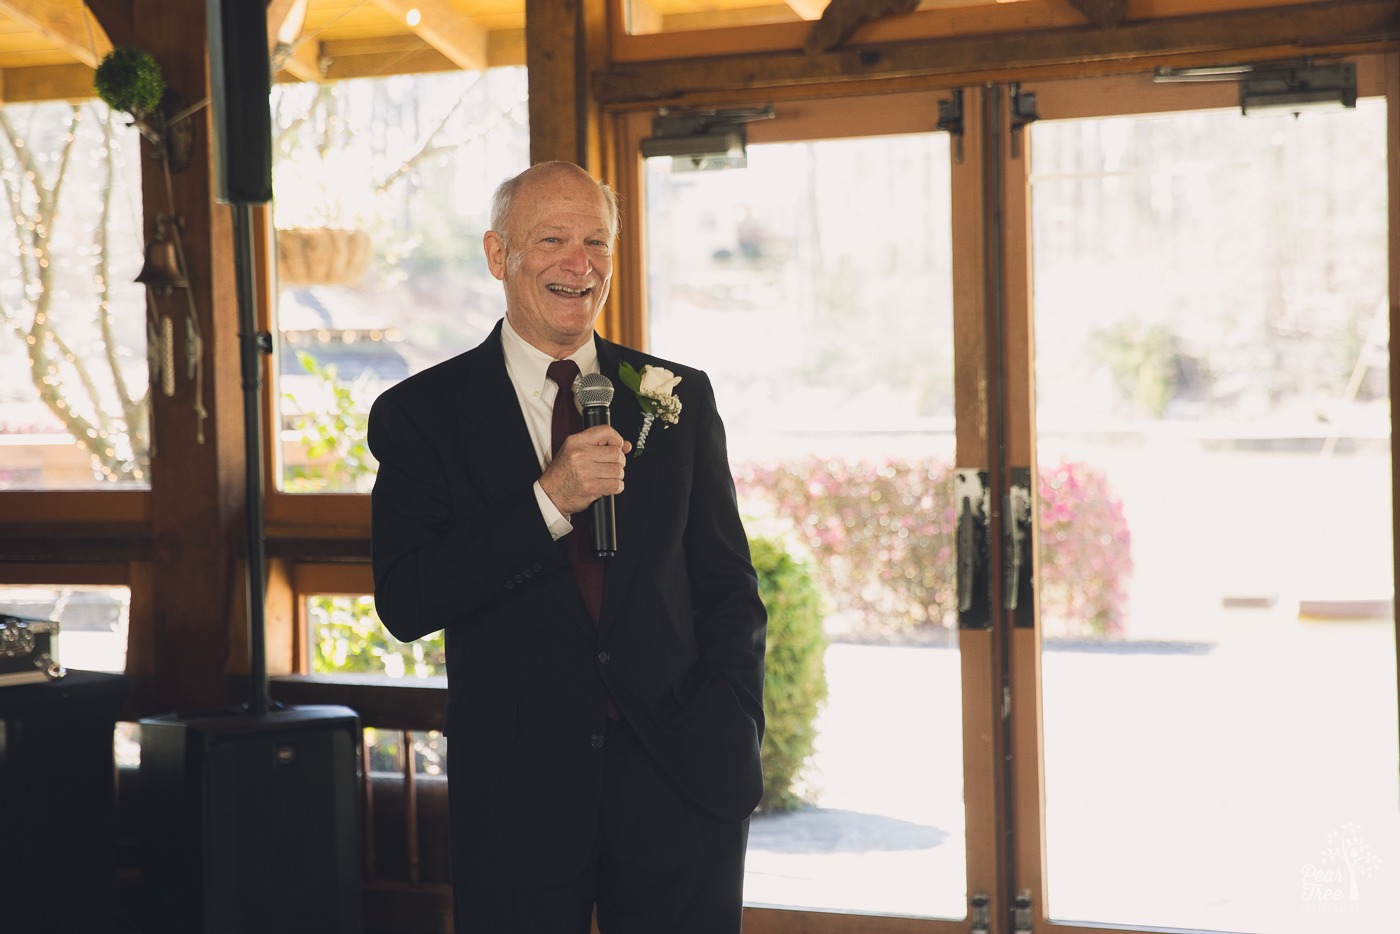 Father of the bride smiling while holding the microphone and toasting his daughter